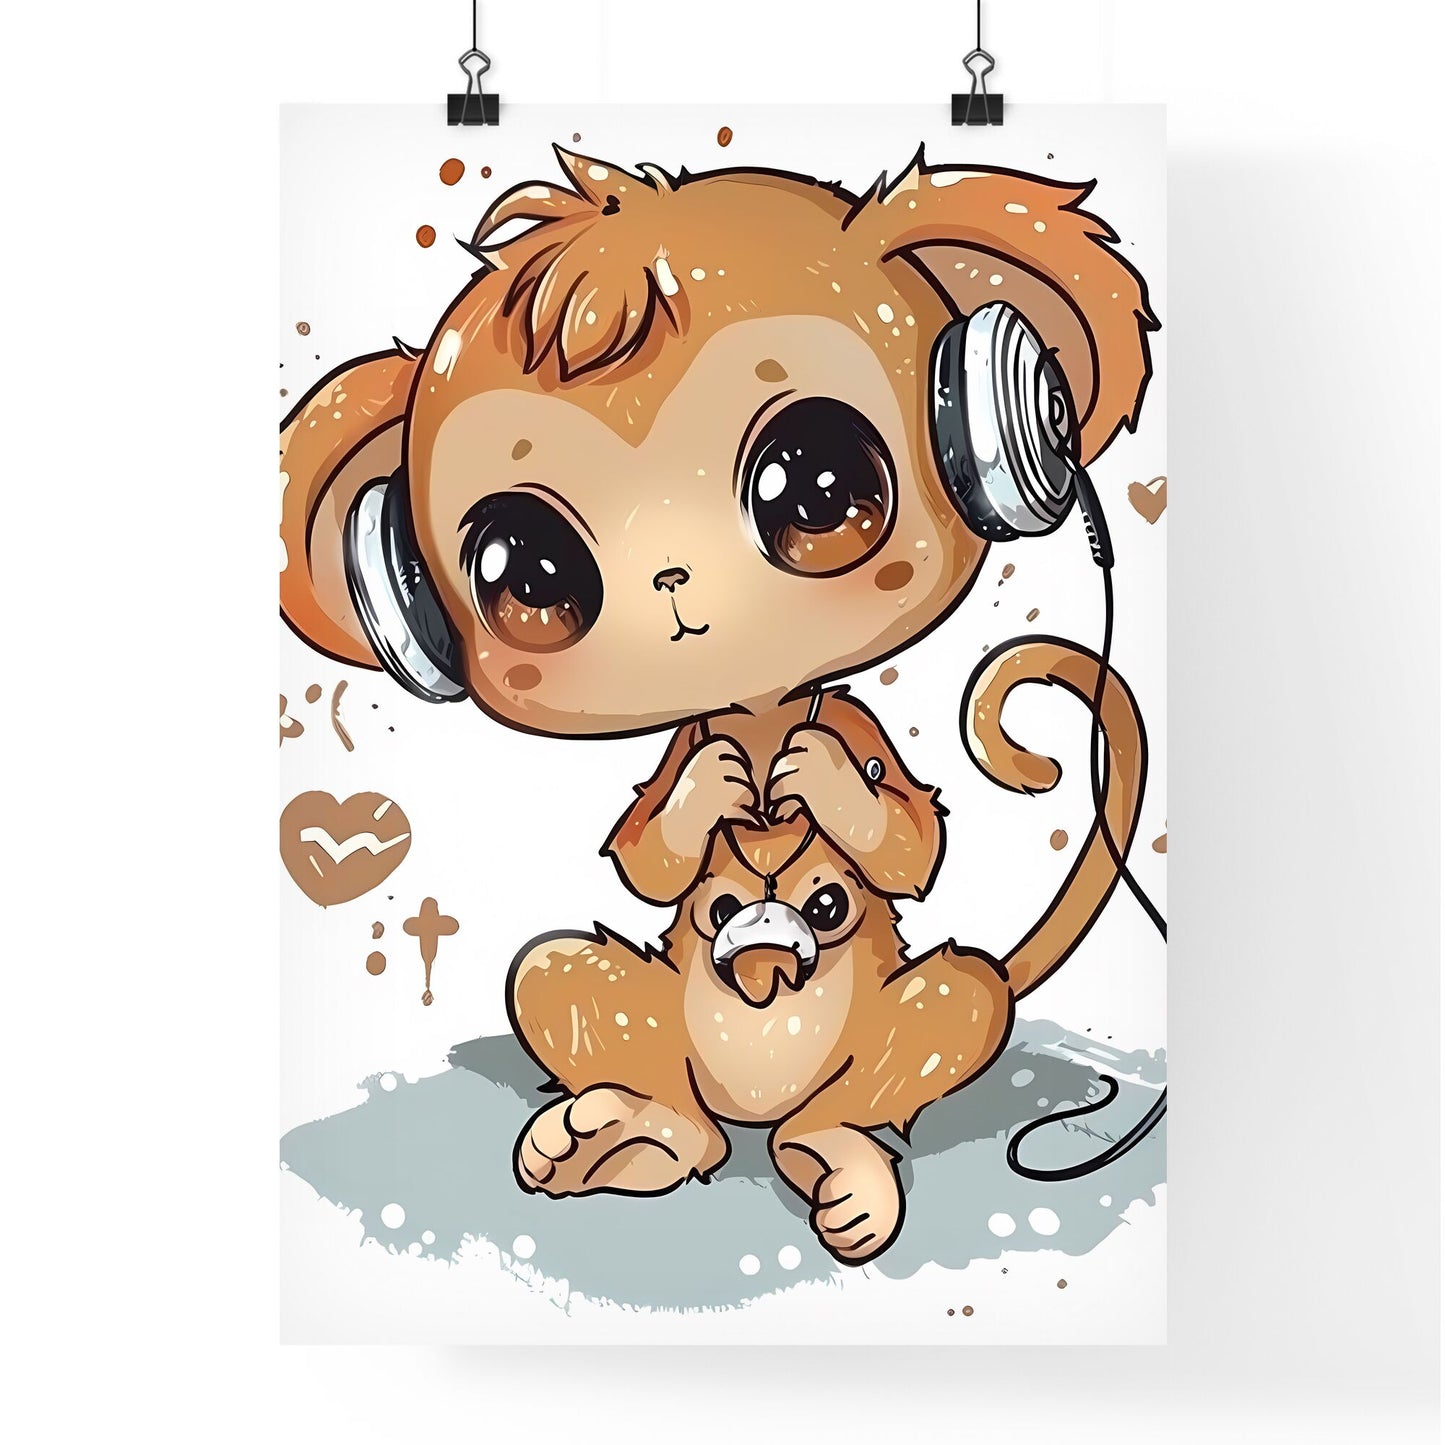 Cute and Happy Kawaii Style Cartoon Monkey Wearing Headphones on White Background, Colorful Clear Outline, Vibrant Painting with Focus on Art Aspect Default Title